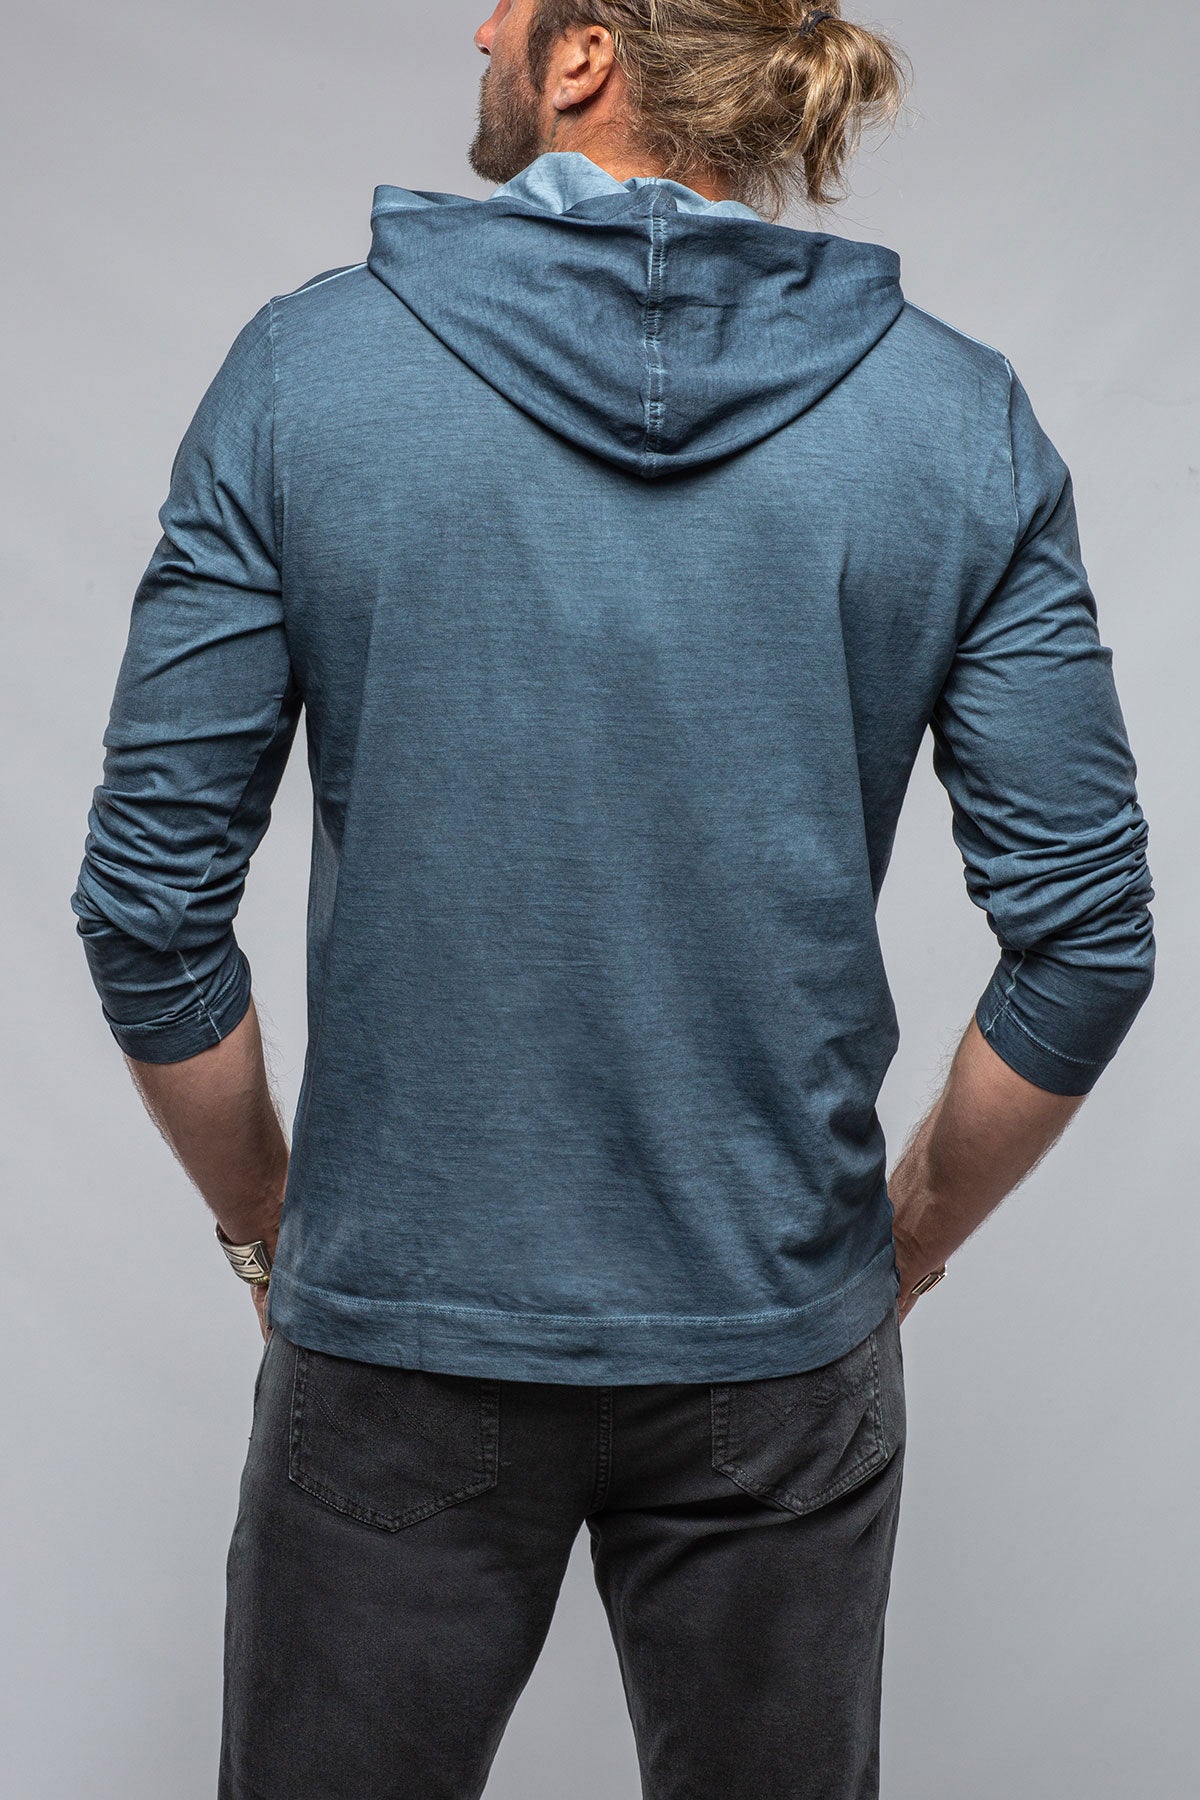 Ventura Hooded Tee in Midnight Blue | Mens - Shirts - T-Shirts | Gimo's Cotton